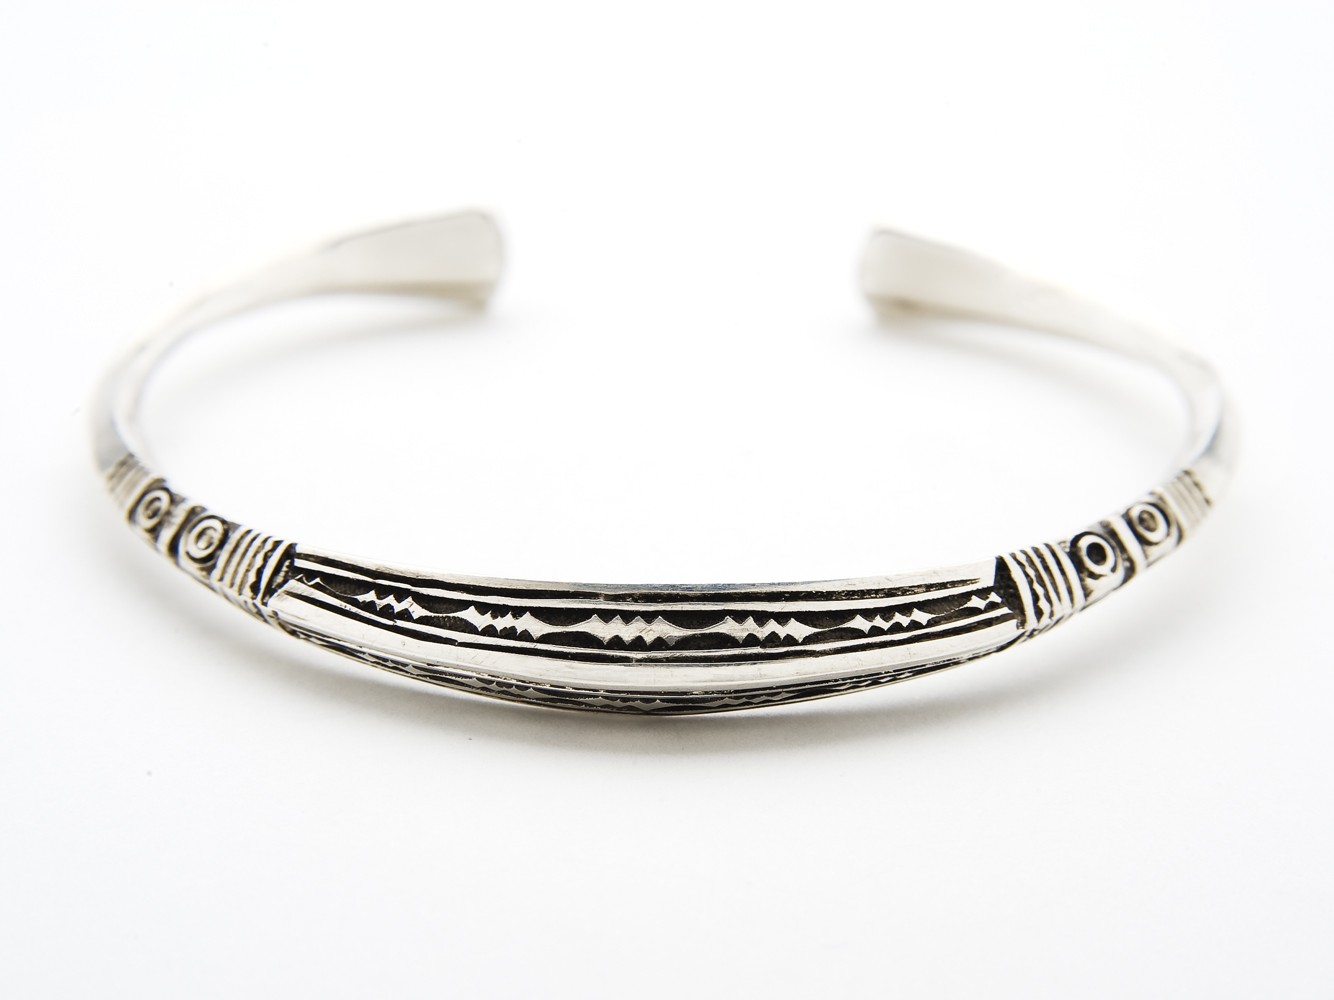 Silver Bracelet with Tapered Ends